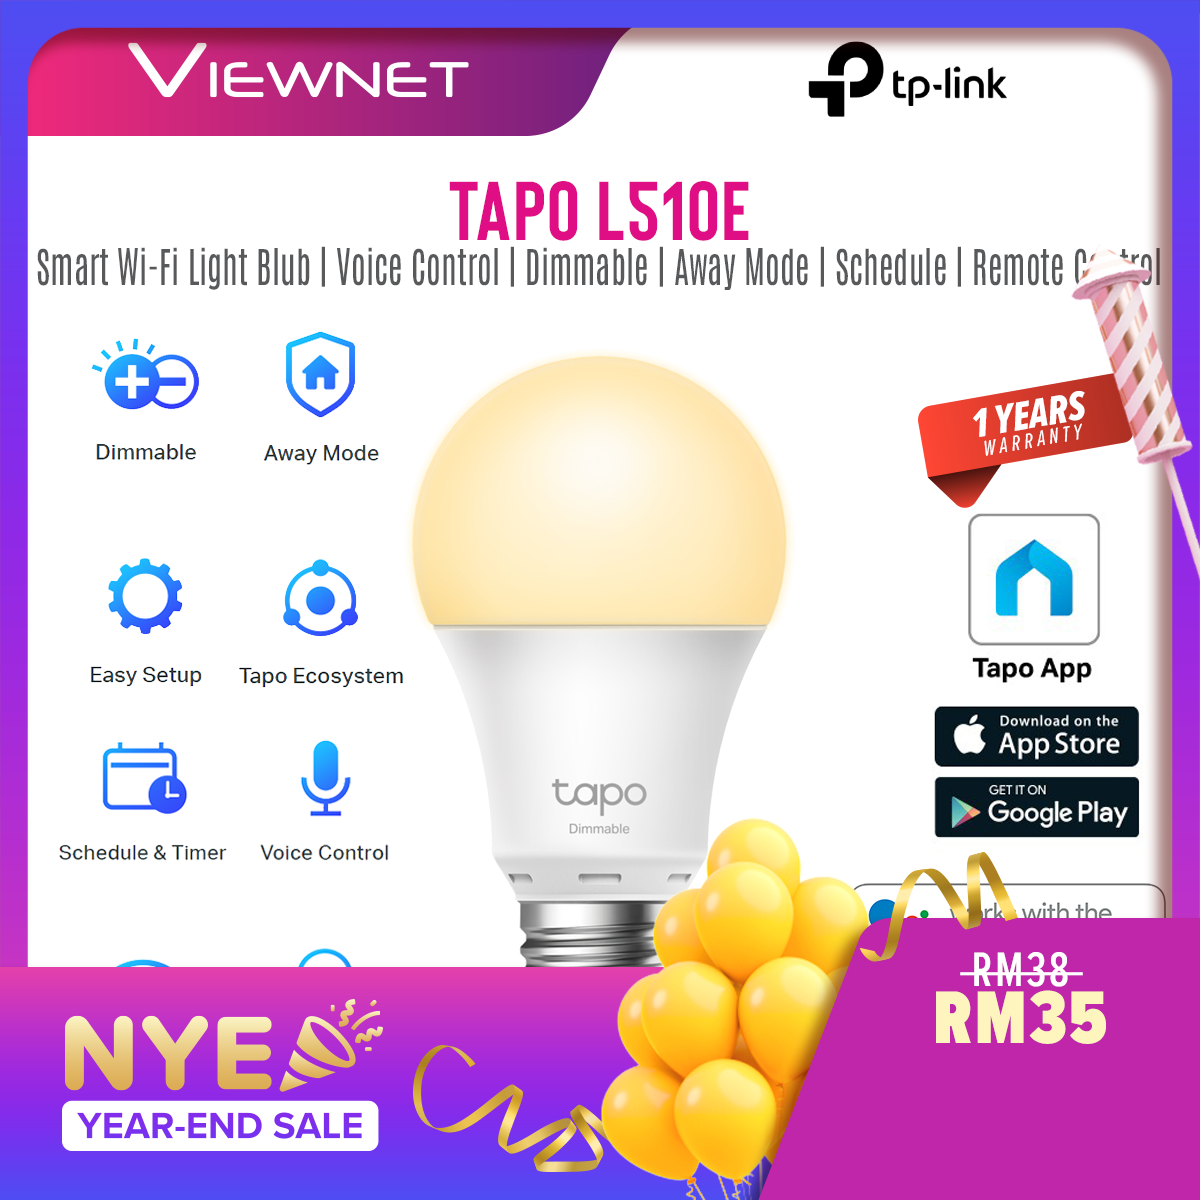 TP-LINK Tapo L510E Smart Bulb with Dimmable, Away Mode, Voice Control, Energy Saving, Tapo Ecosystem, Easy Setup